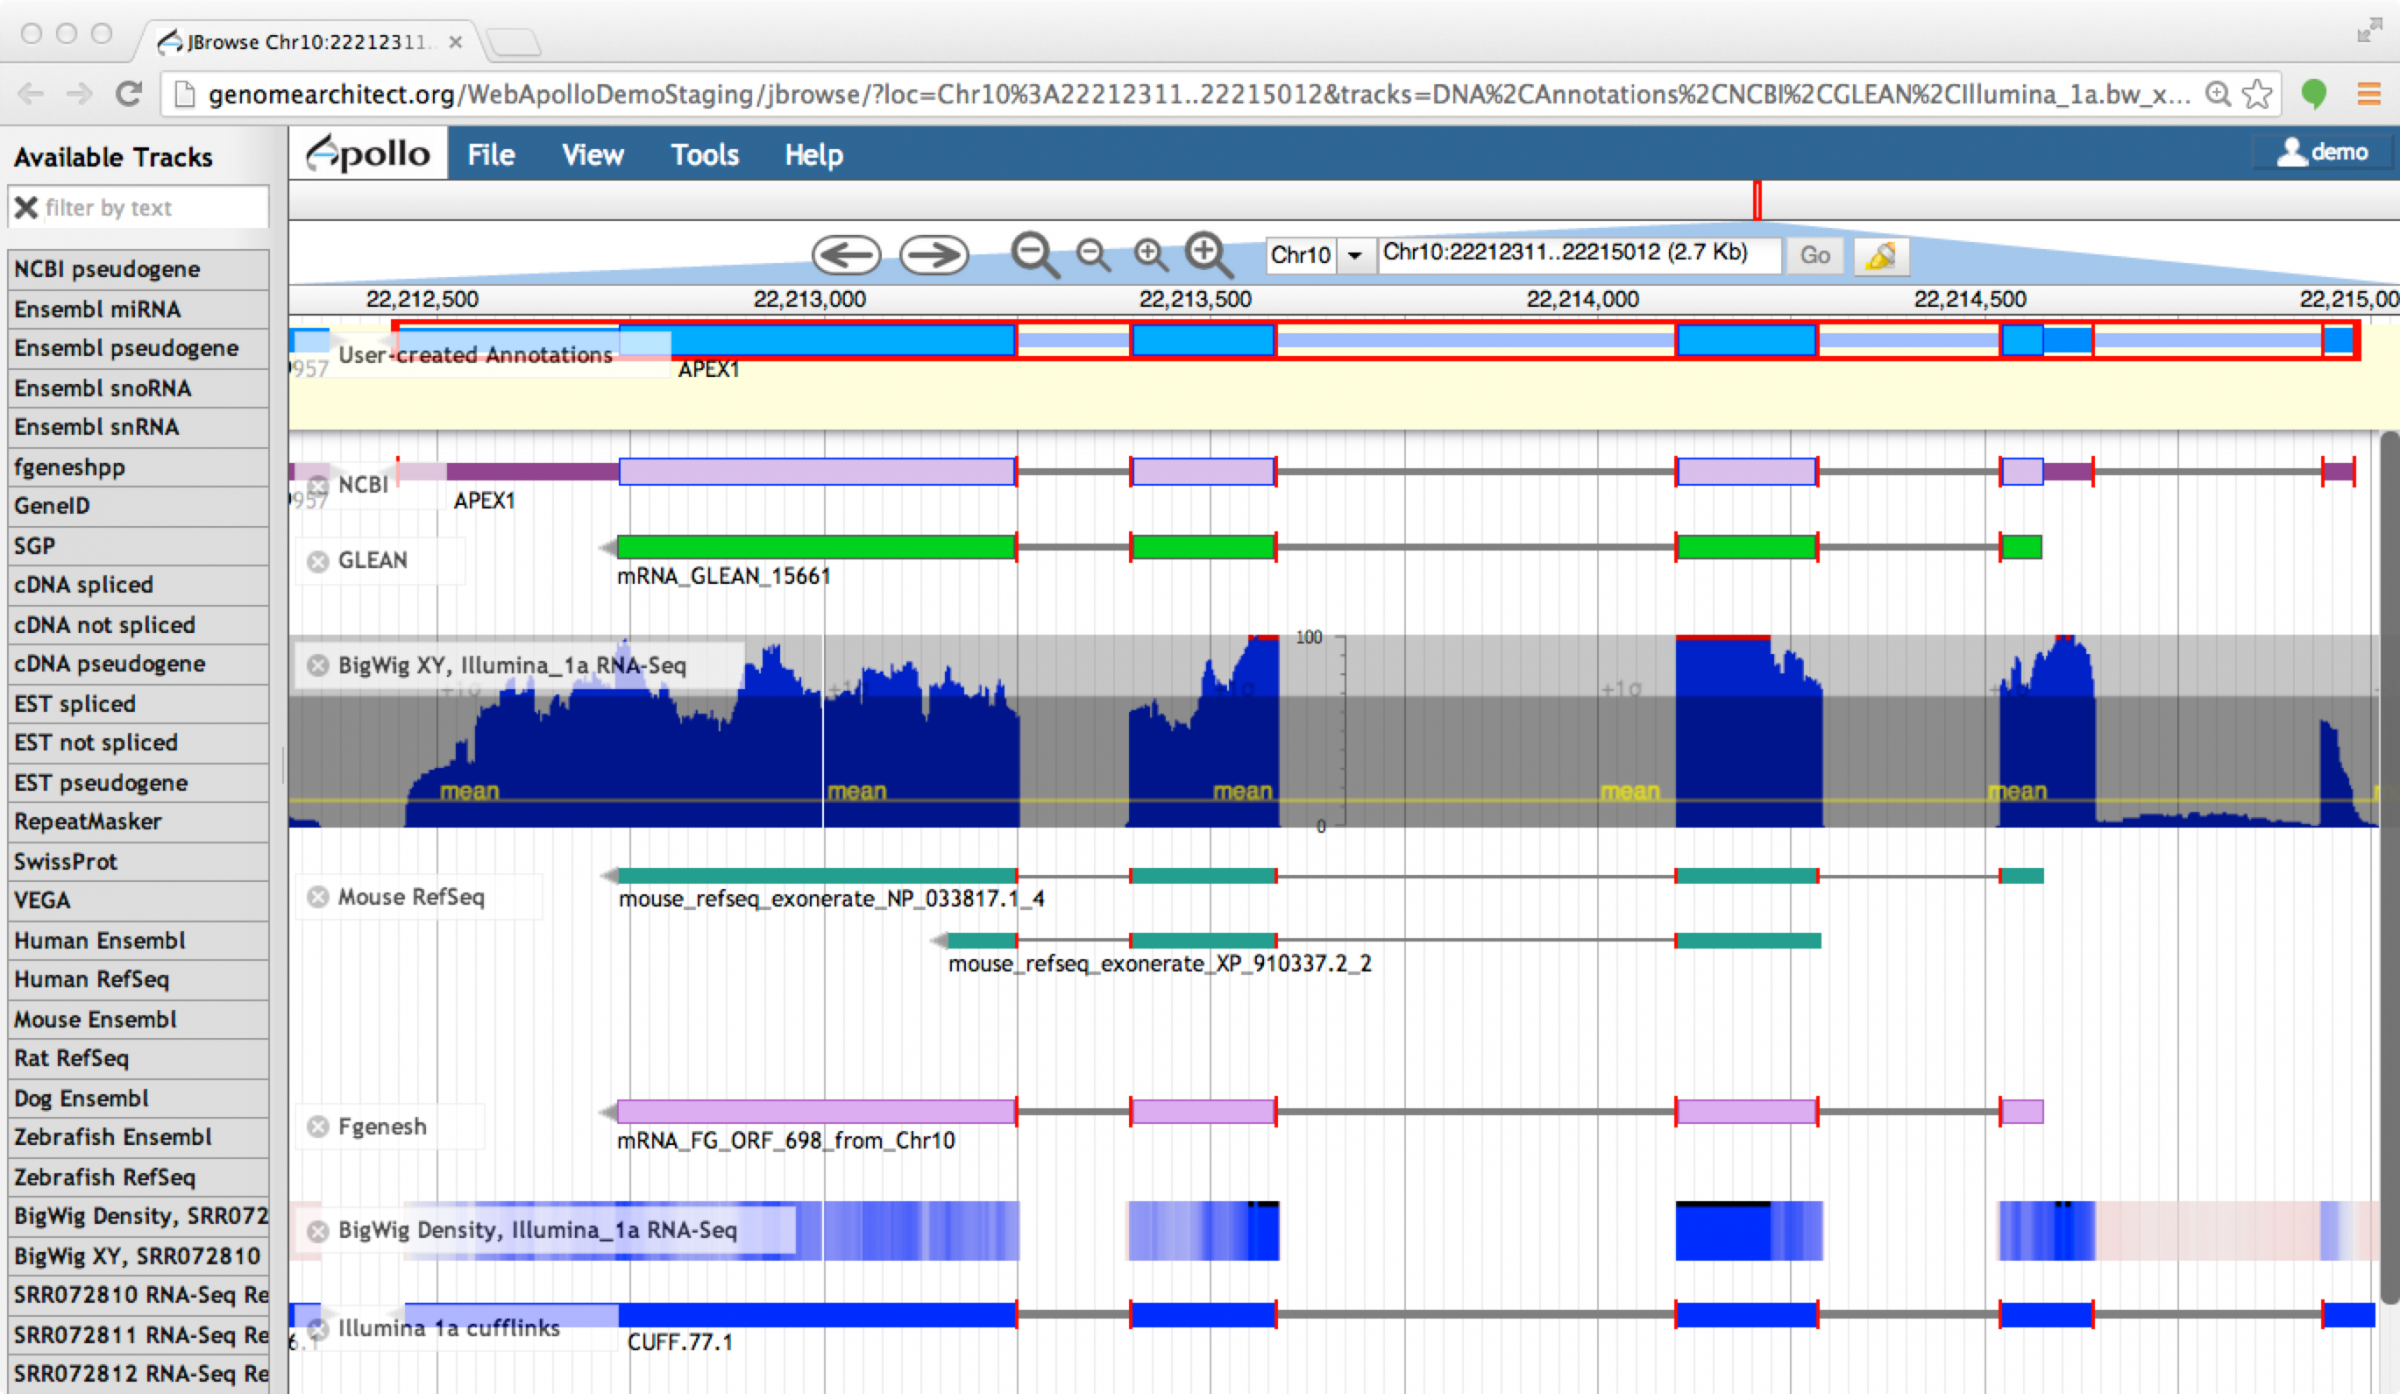 Screenshot of apollo with dozens of tracks in the list. Several gene model predictions are shown as well as a few bigwig XY density from illumina sequencing data.